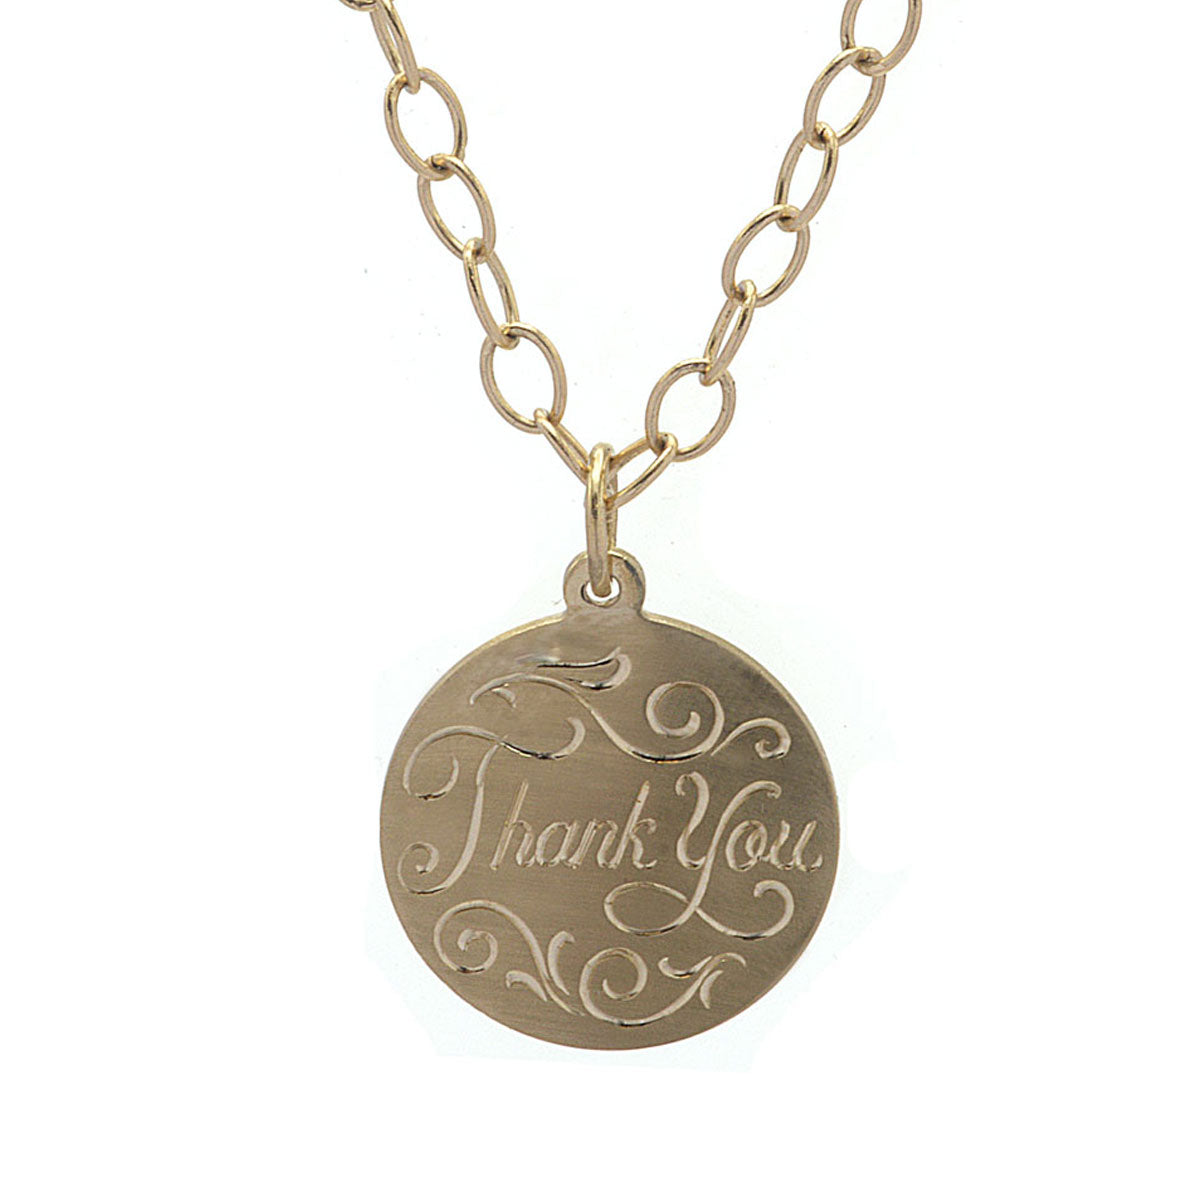 Prayer in Your Heart Chain Necklace Replacement